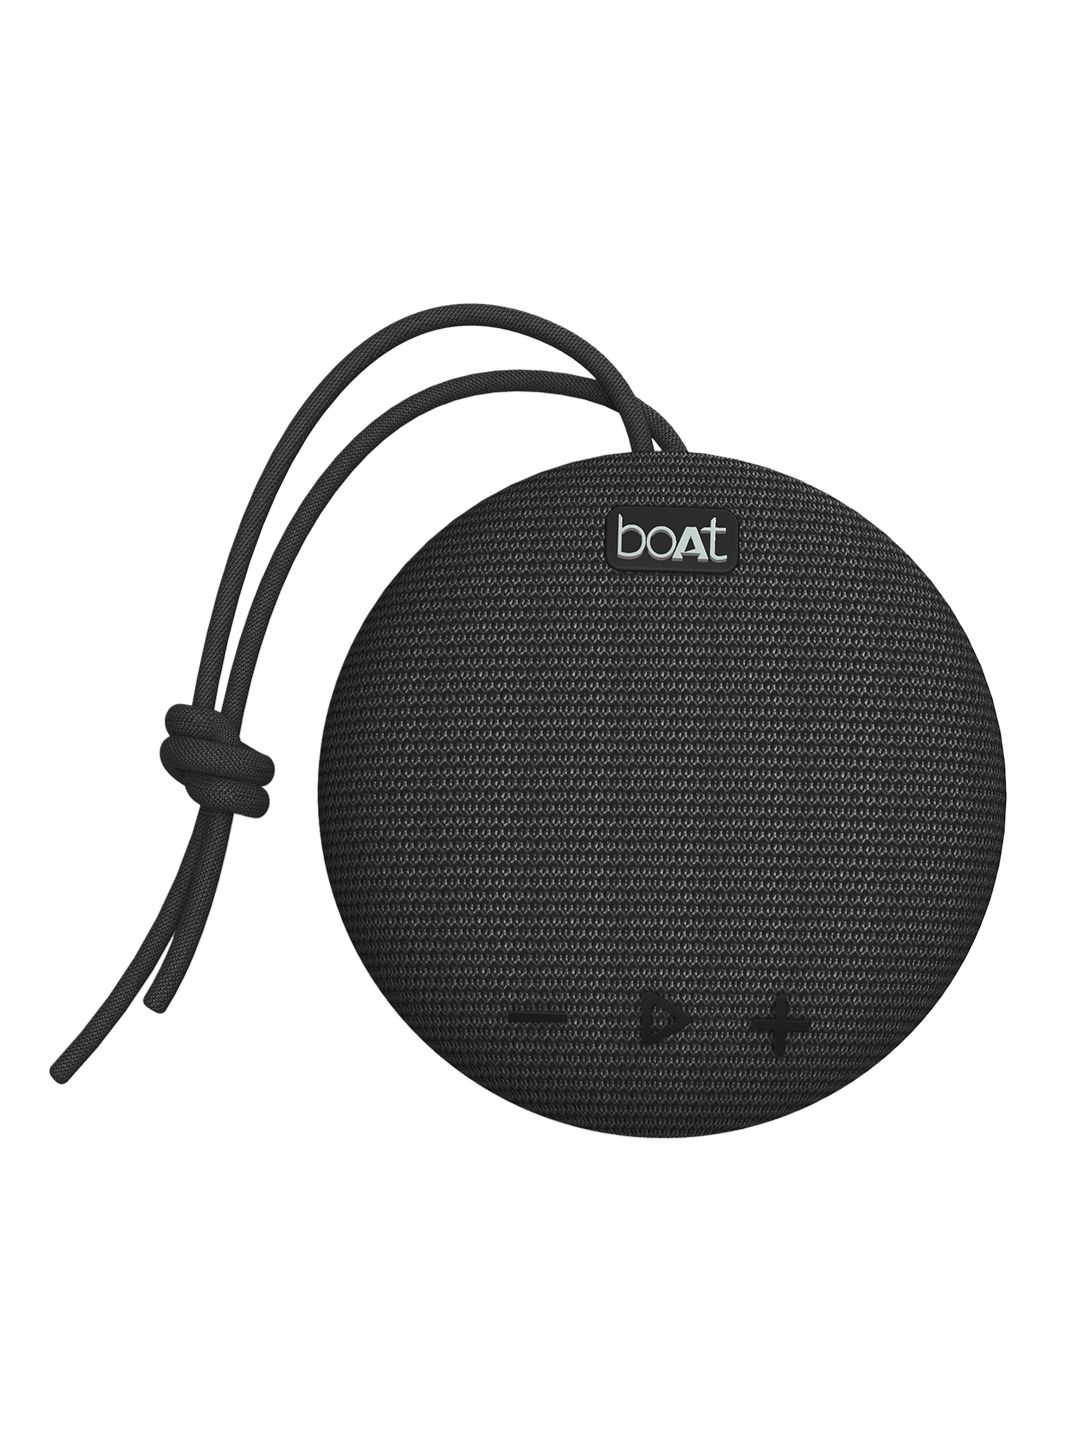 boAt Stone 190 5W Black Portable Wireless Speaker with IPX7 and Bluetooth V5.0 Price in India